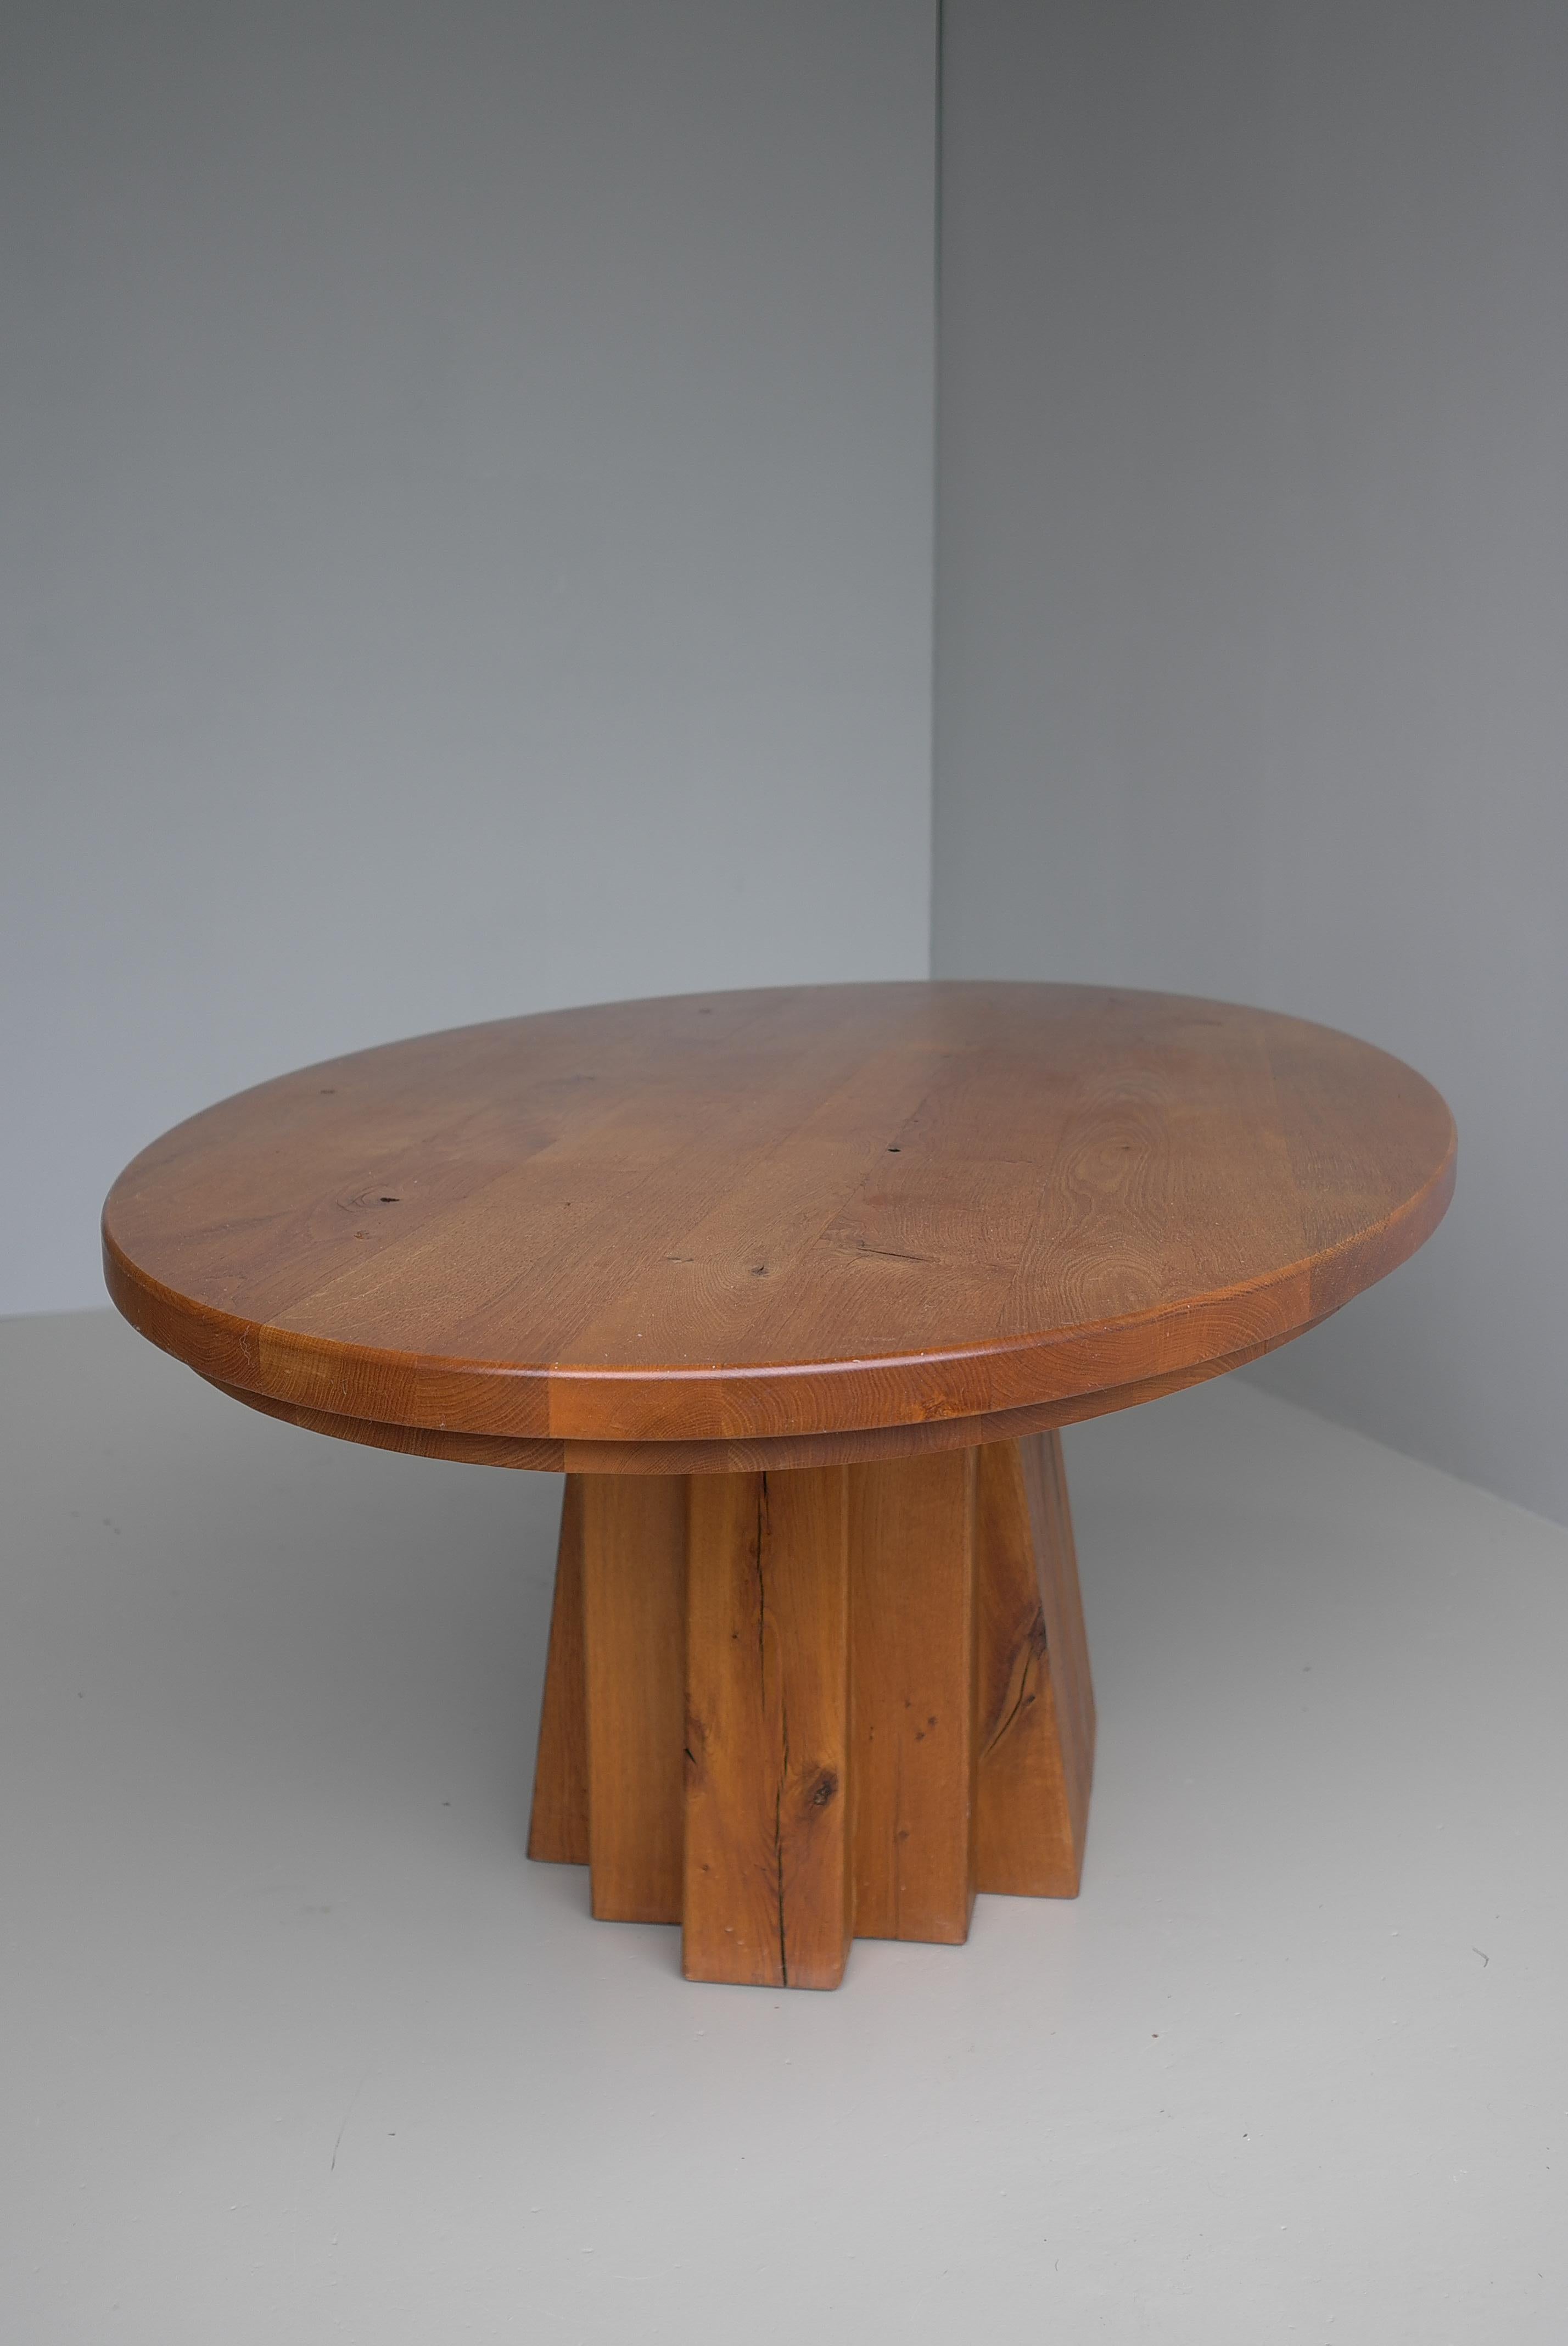 Large Oval Solid Oak Dining Table in style of Pierre Chapo, France circa 1970 For Sale 5